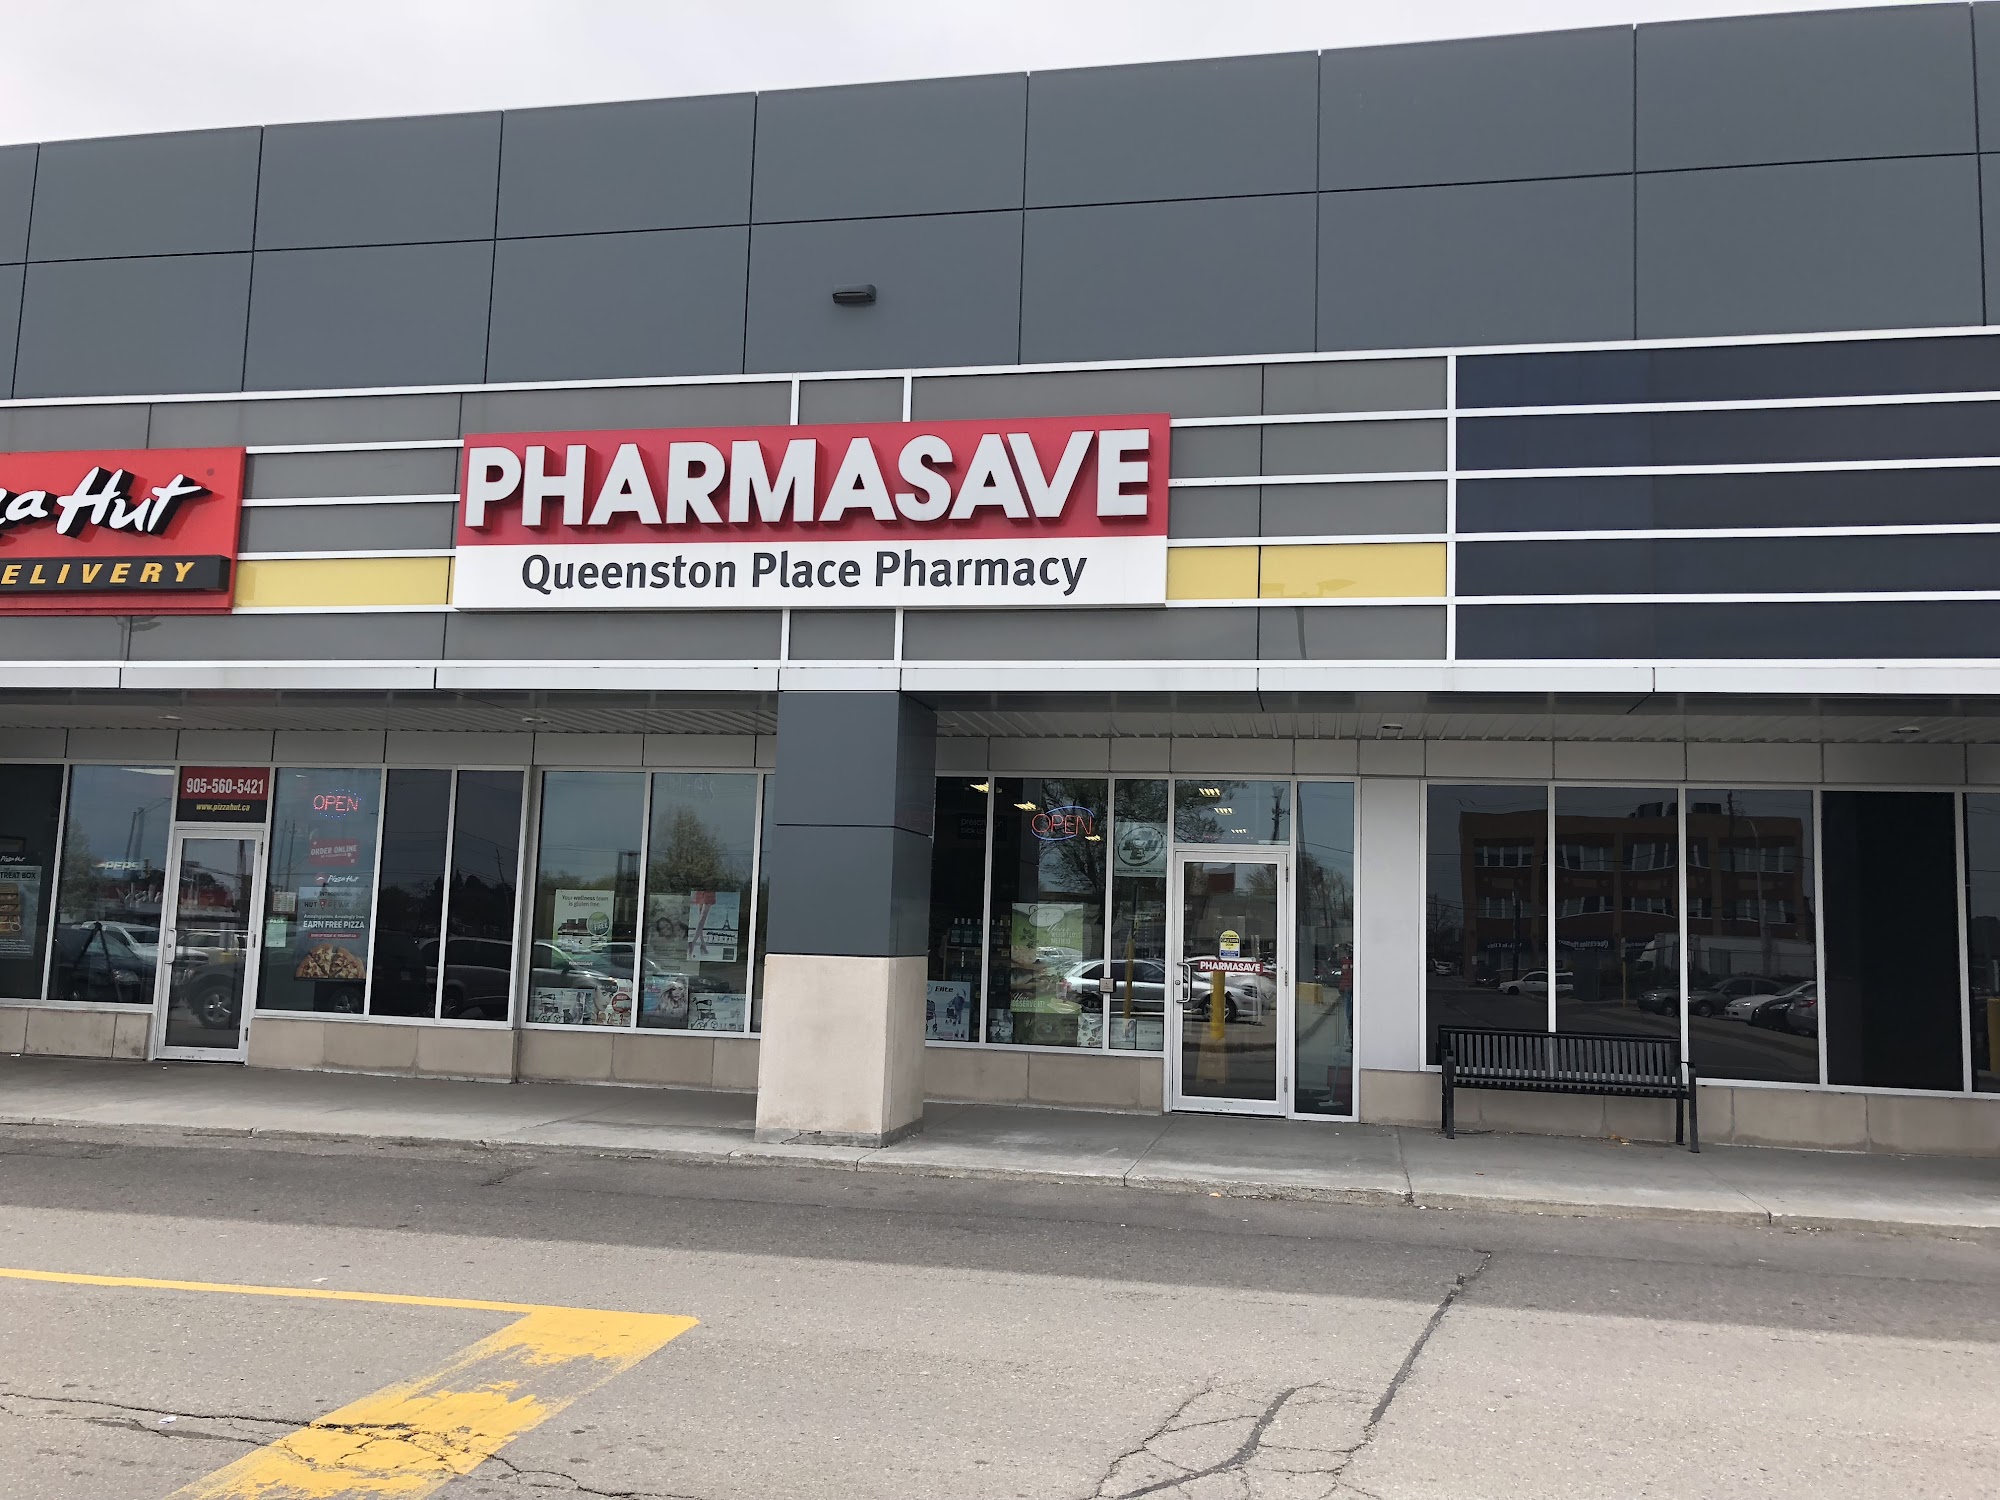 Pharmasave Queenston Place Pharmacy